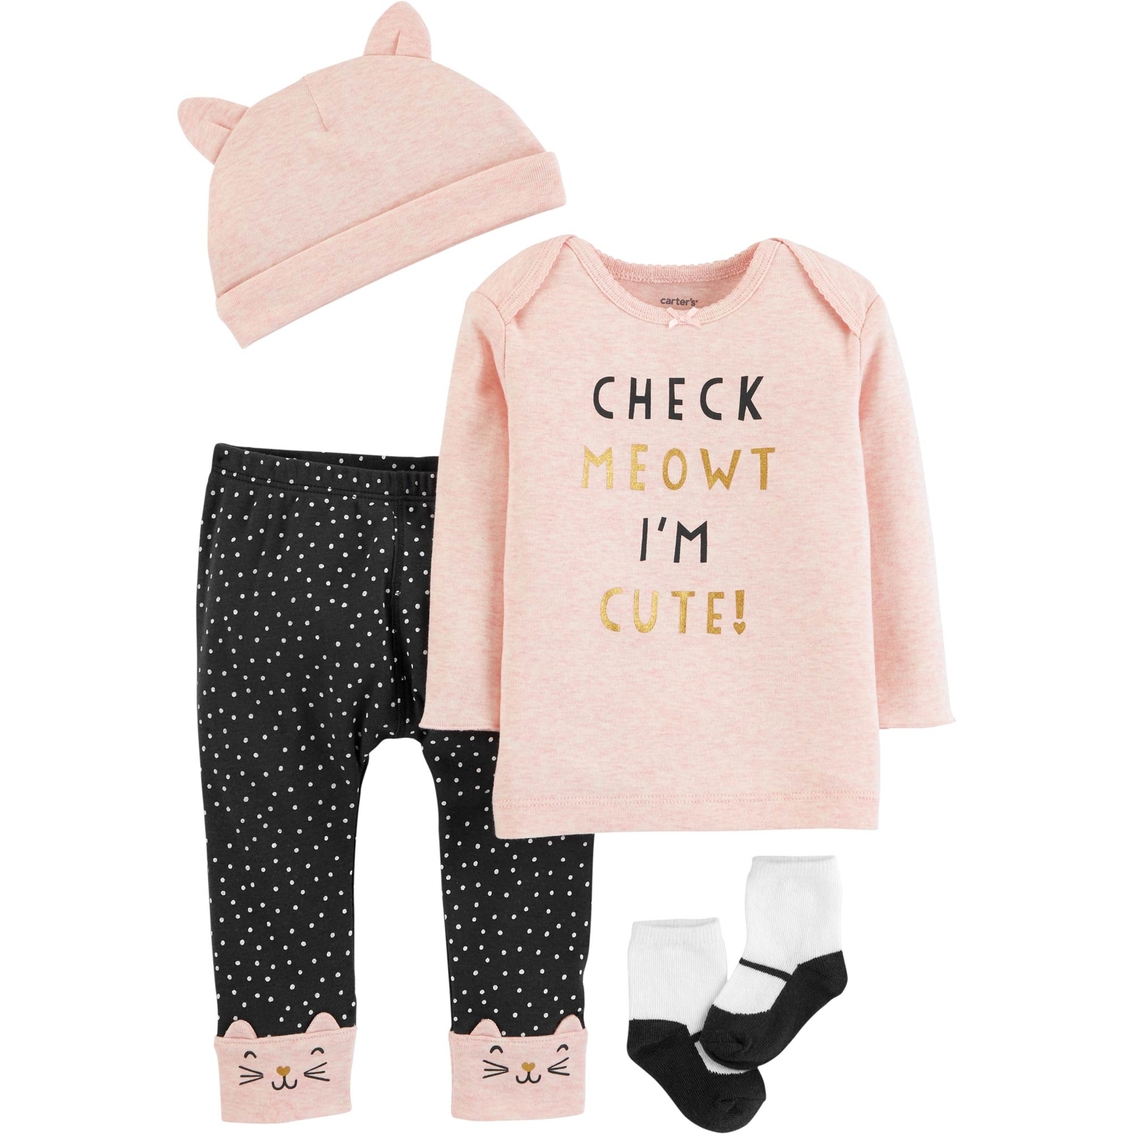 carter's newborn take home outfit girl